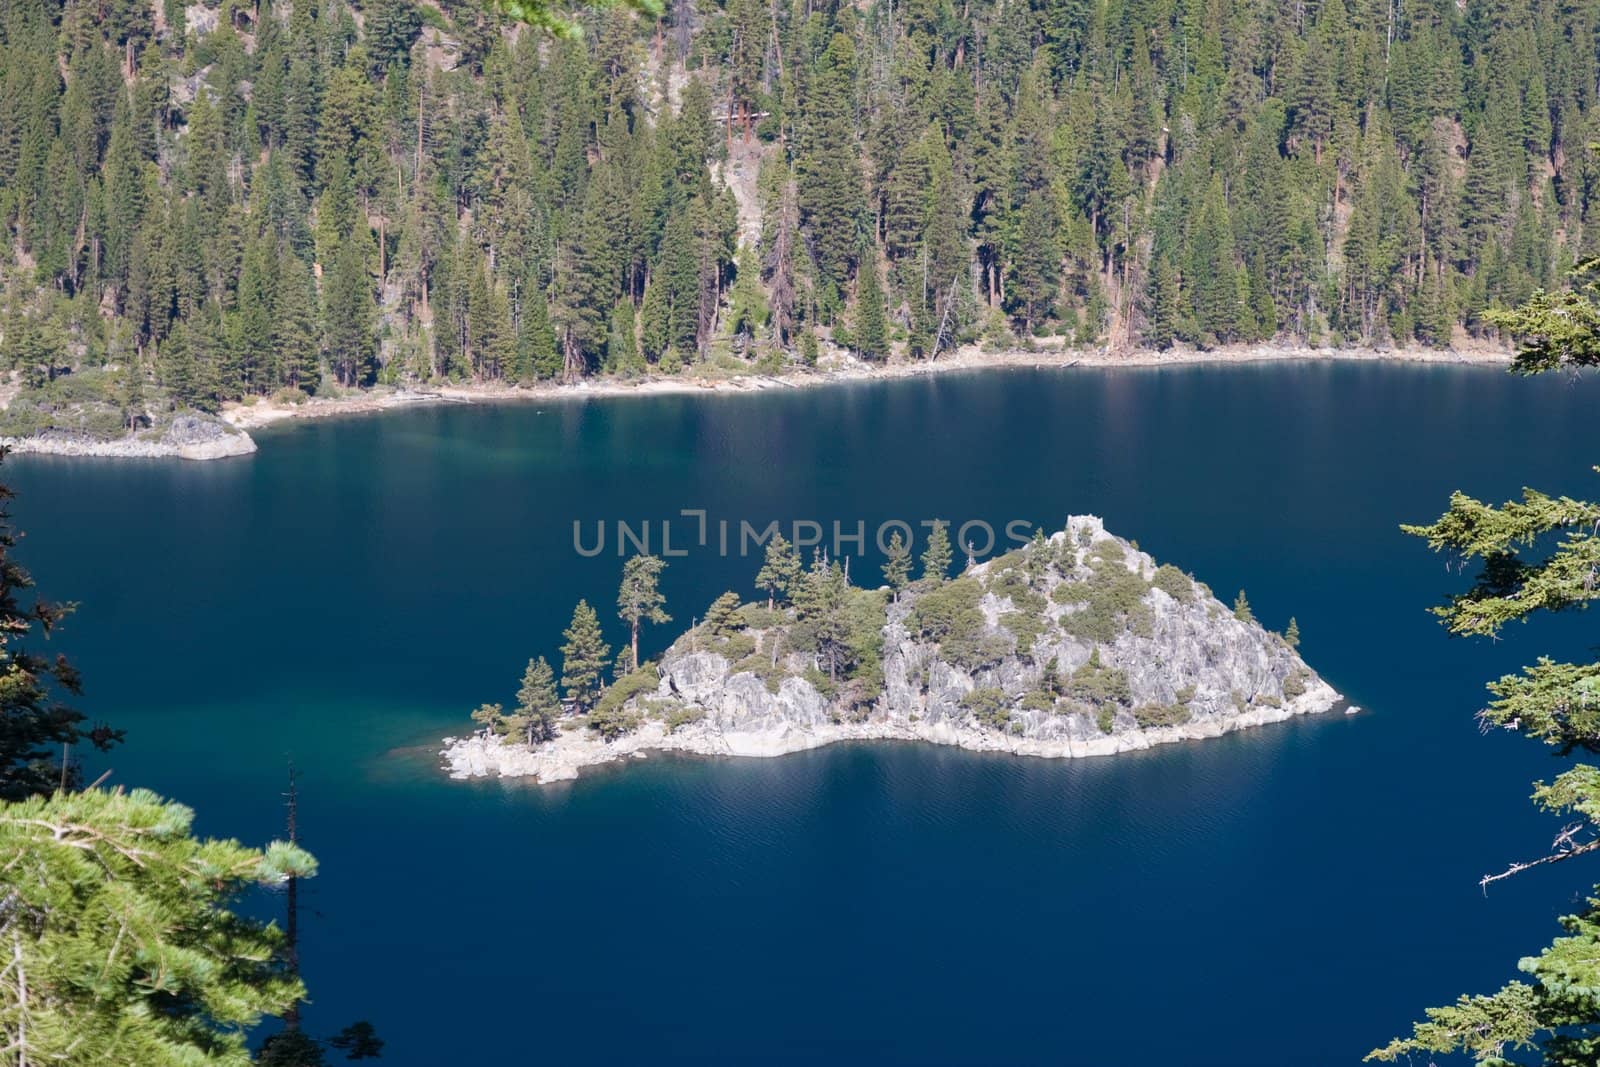 Hilly island in Lake Tahoe California surrounded by trees